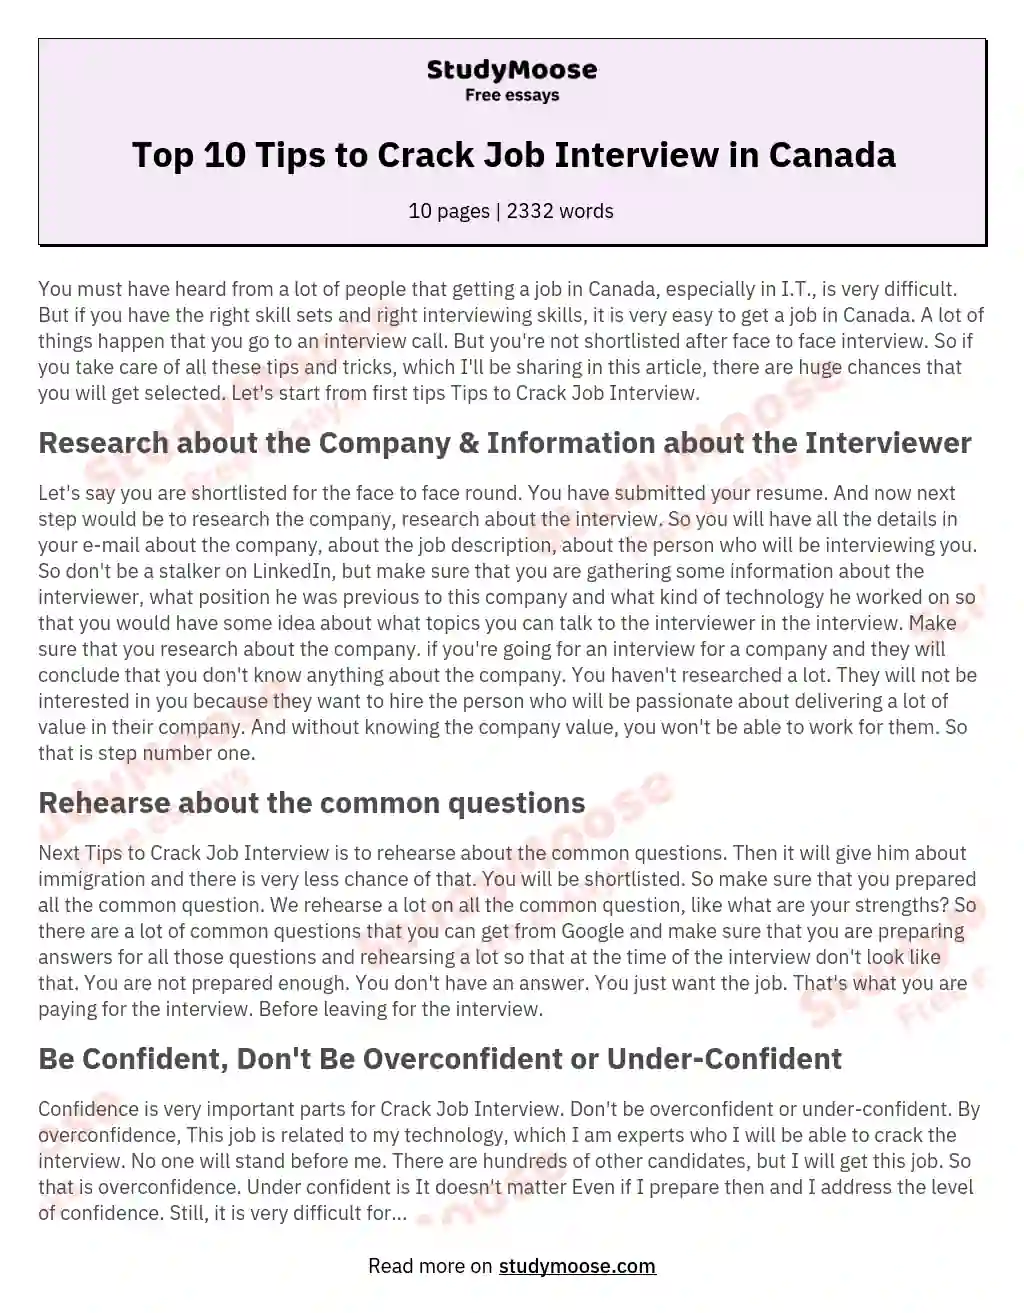 Top 10 Tips to Crack Job Interview in Canada